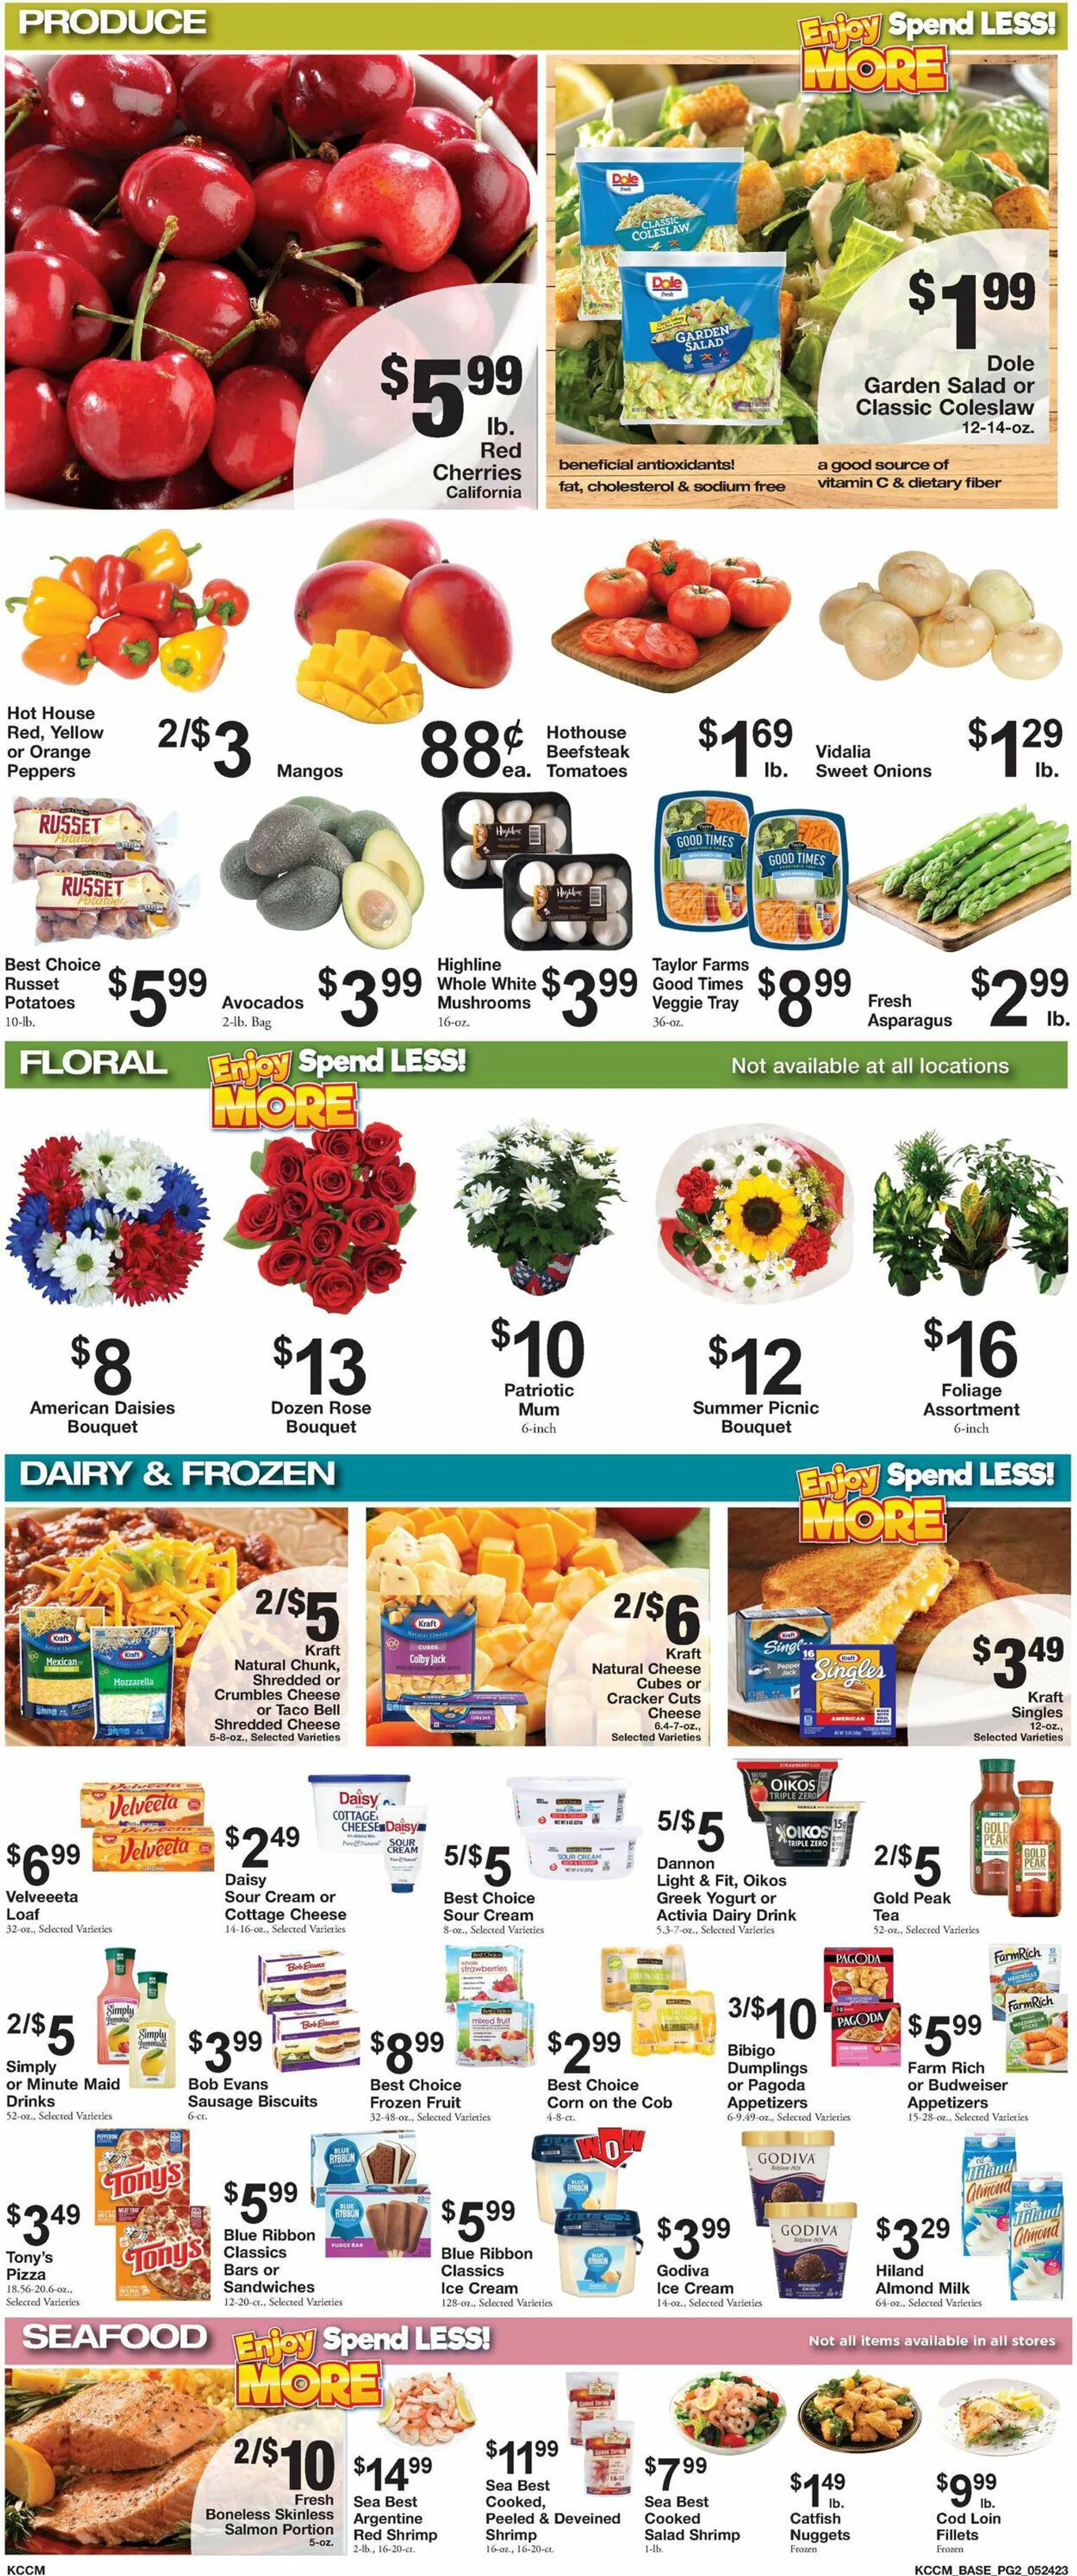 Country Mart Current weekly ad - 2